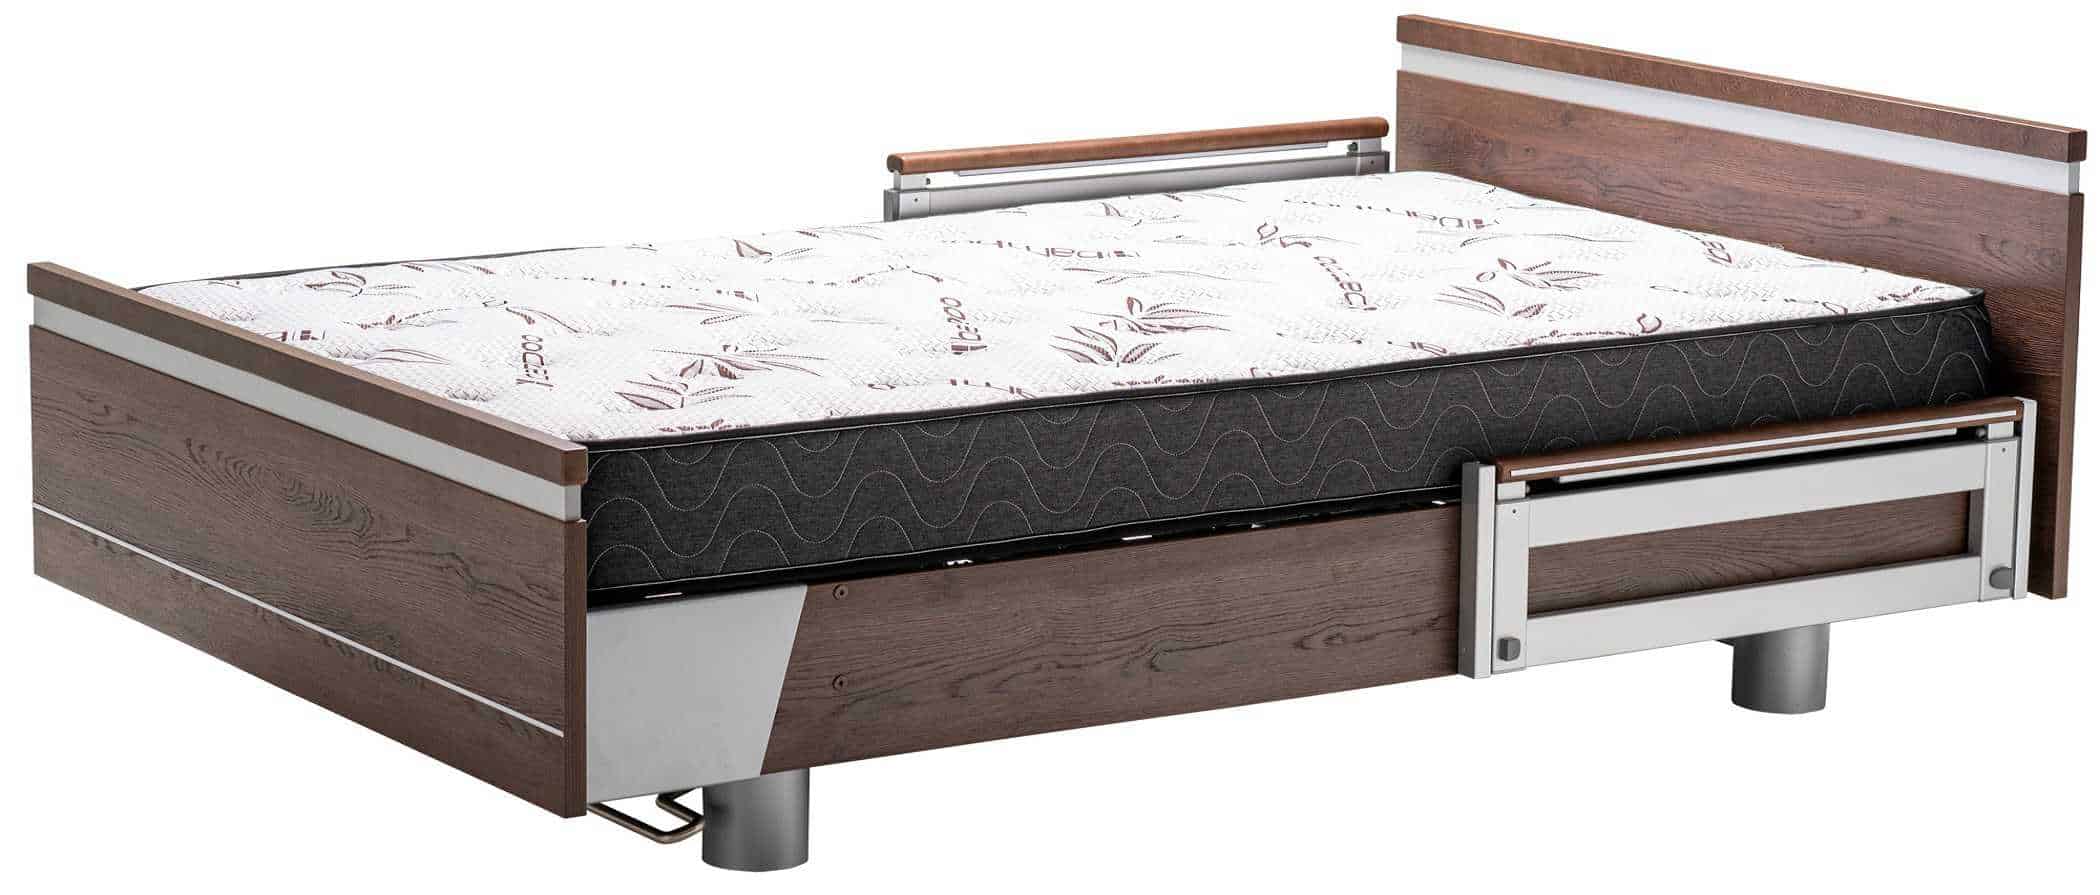 SonderCare Aura™ Wide Hospital Bed Feature Image